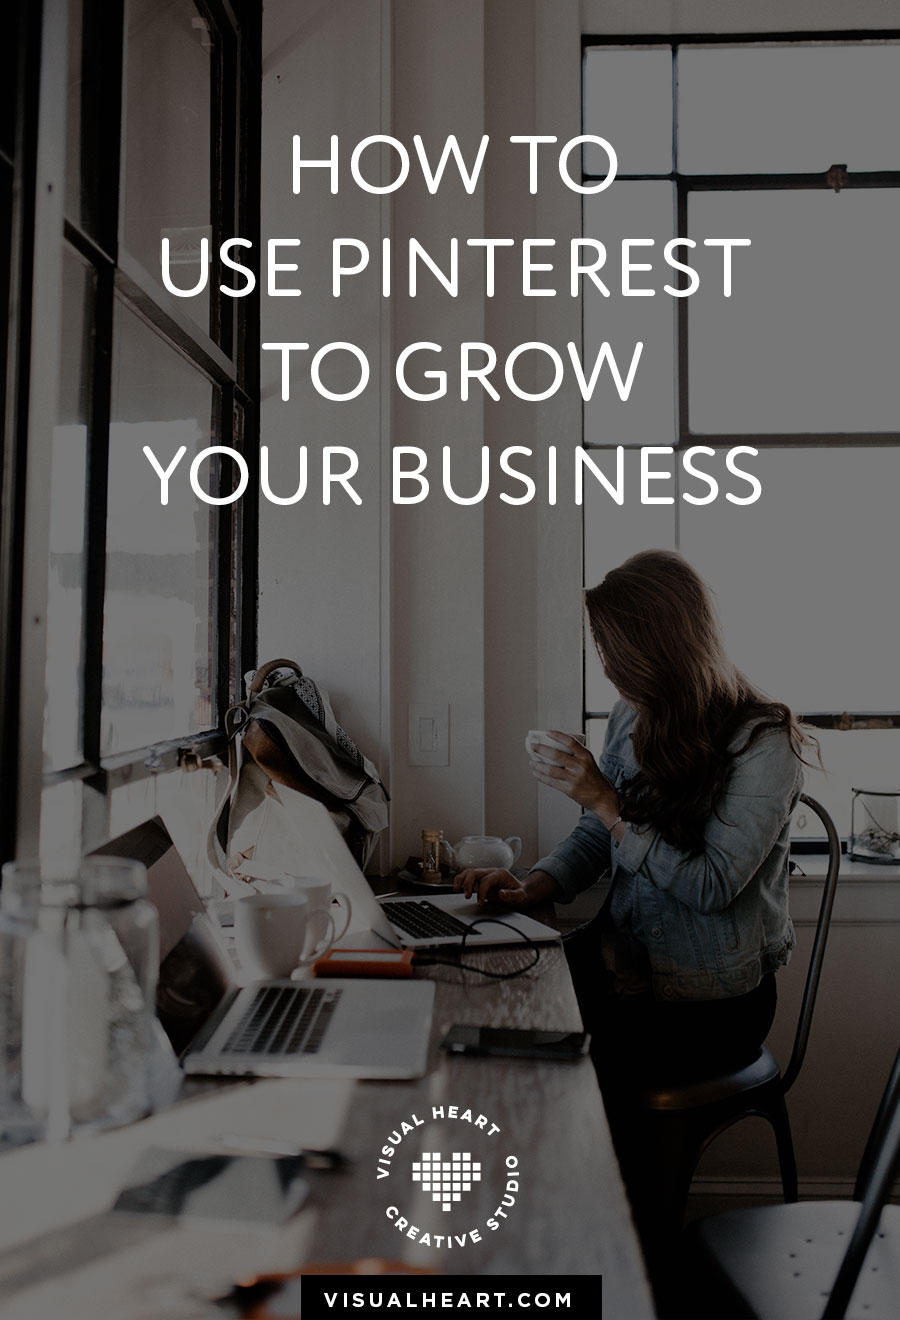 Pinterest tips for business. How to drive traffic to your website using Pinterest. @visualheart